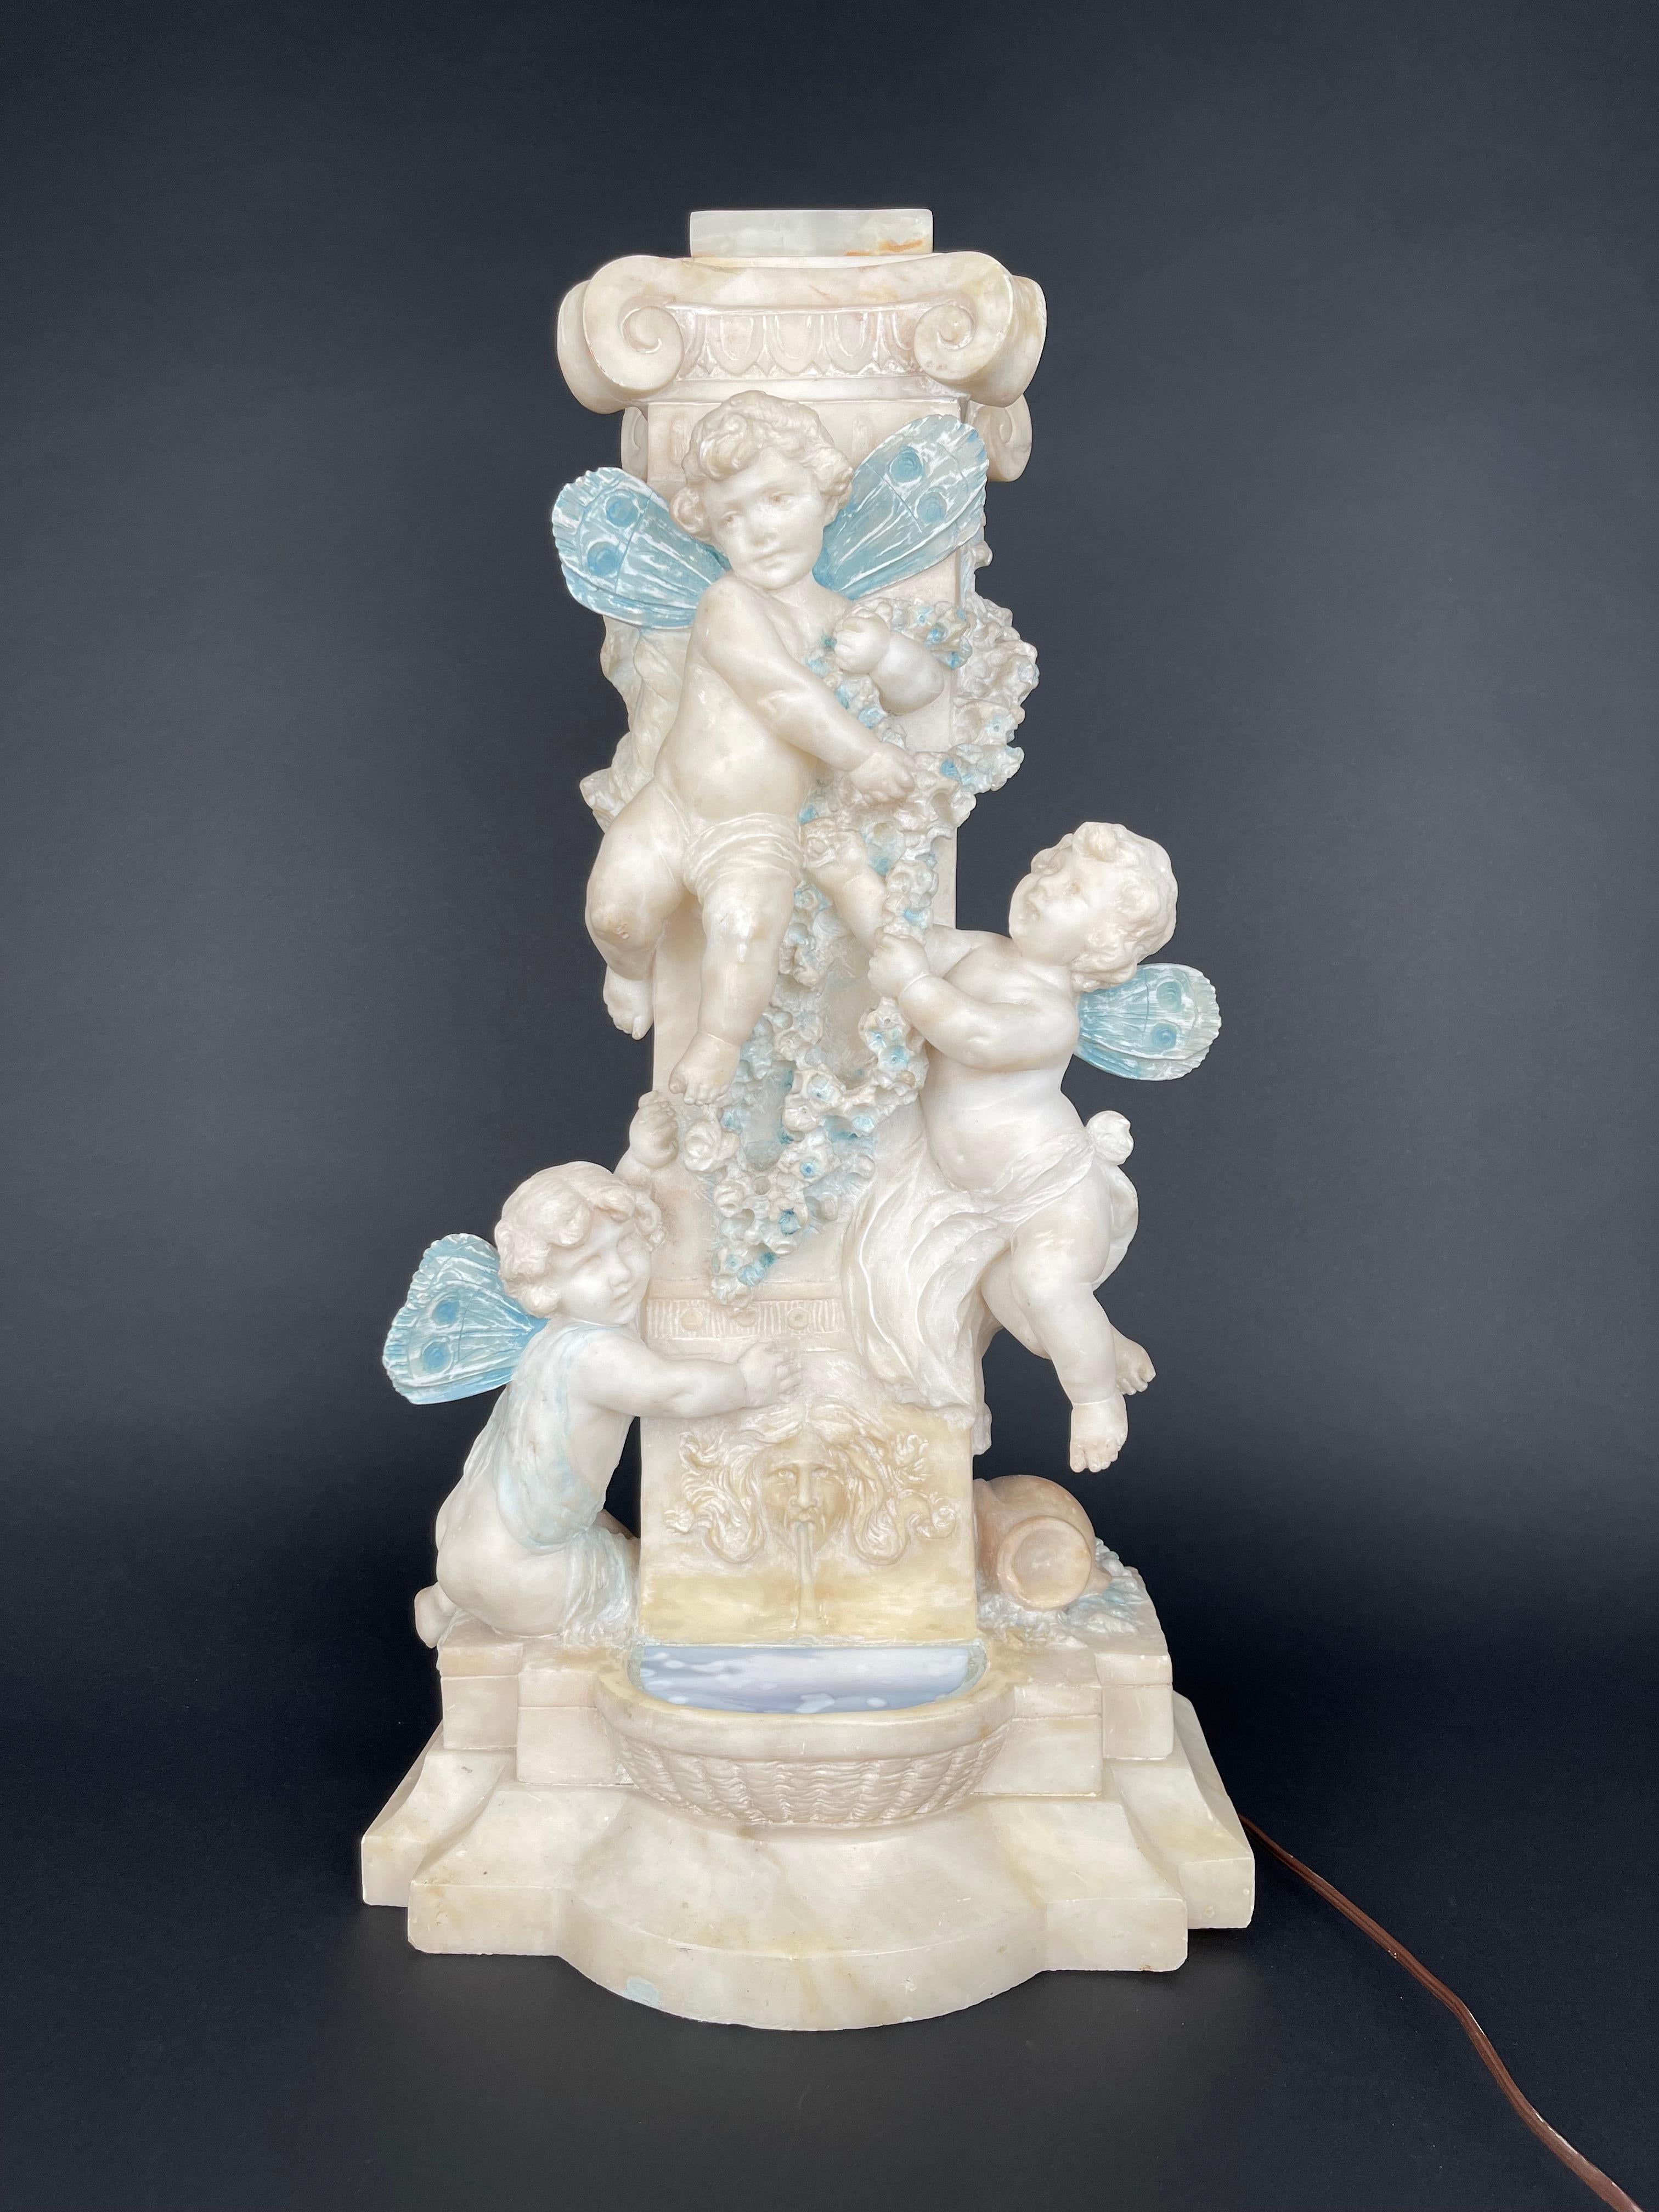 An Art Nouveau Hand Carved Marble Alabaster Figural Lamp. The lamp is finely carved in the shape of a fountain with flying cupid angels holding flowers. Under the cupids is a carved satyr that water comes out of his mouth and flows down to a small